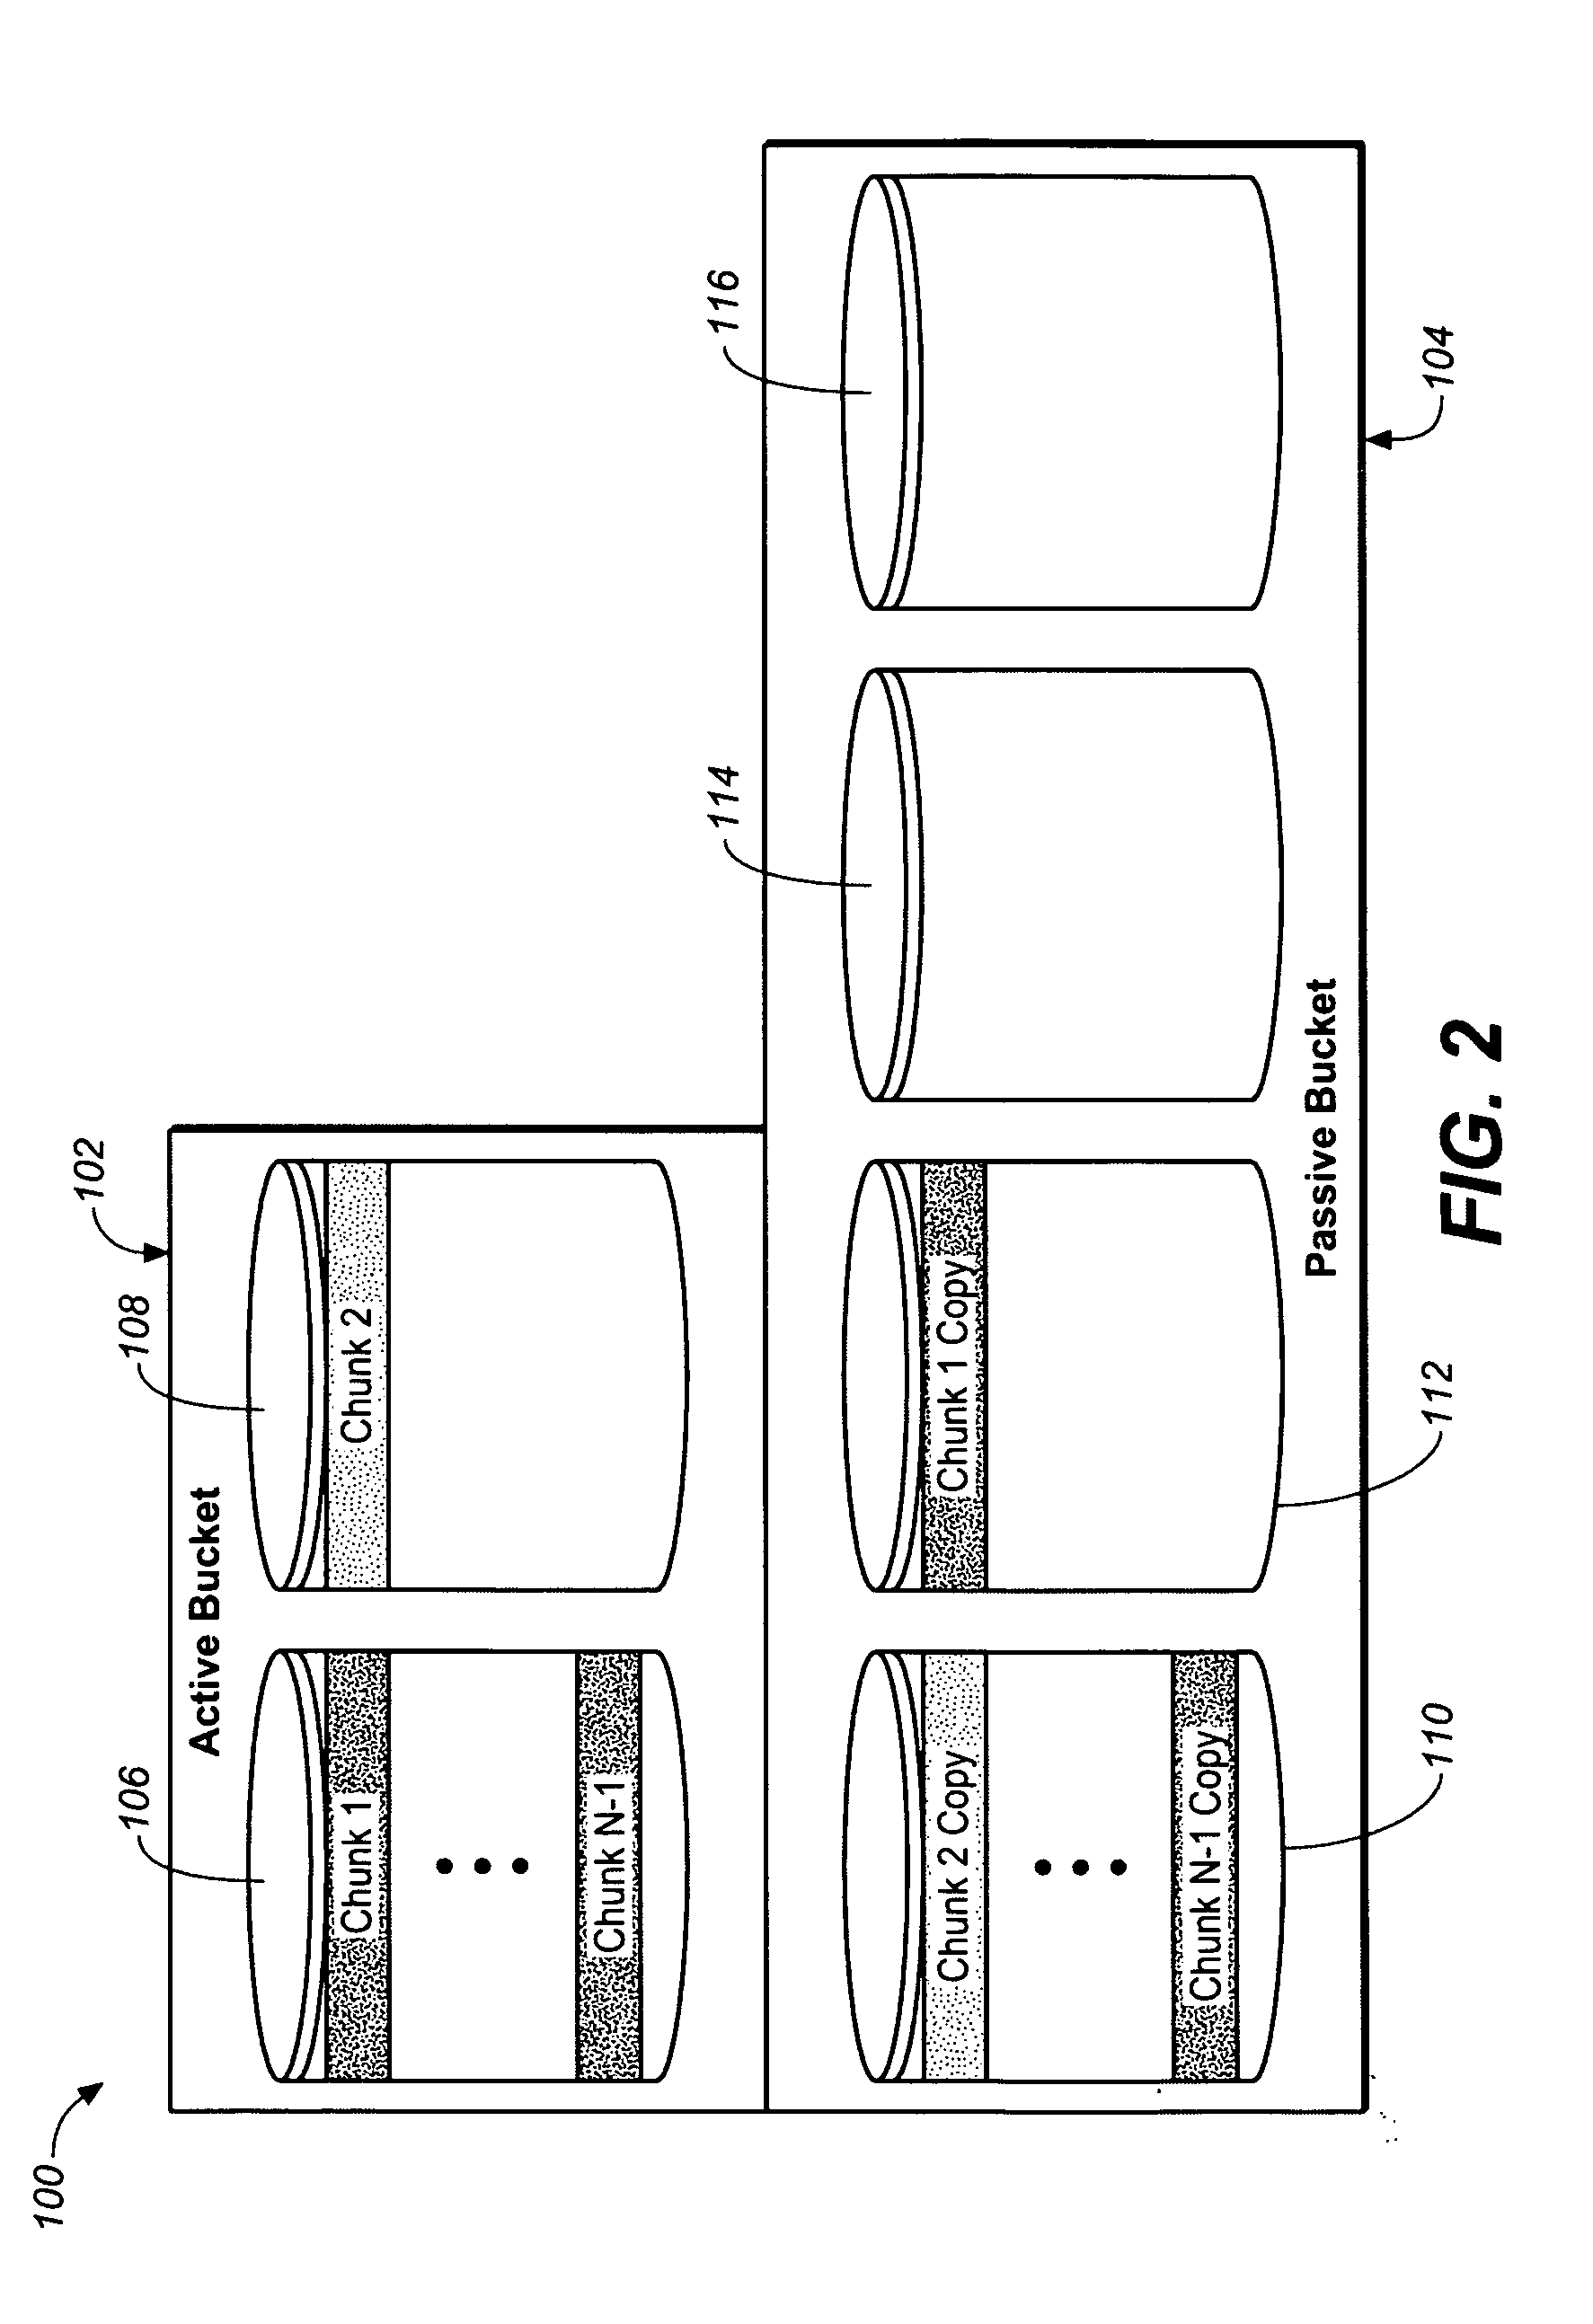 Method for utilizing mirroring in a data storage system to promote improved data accessibility and improved system efficiency